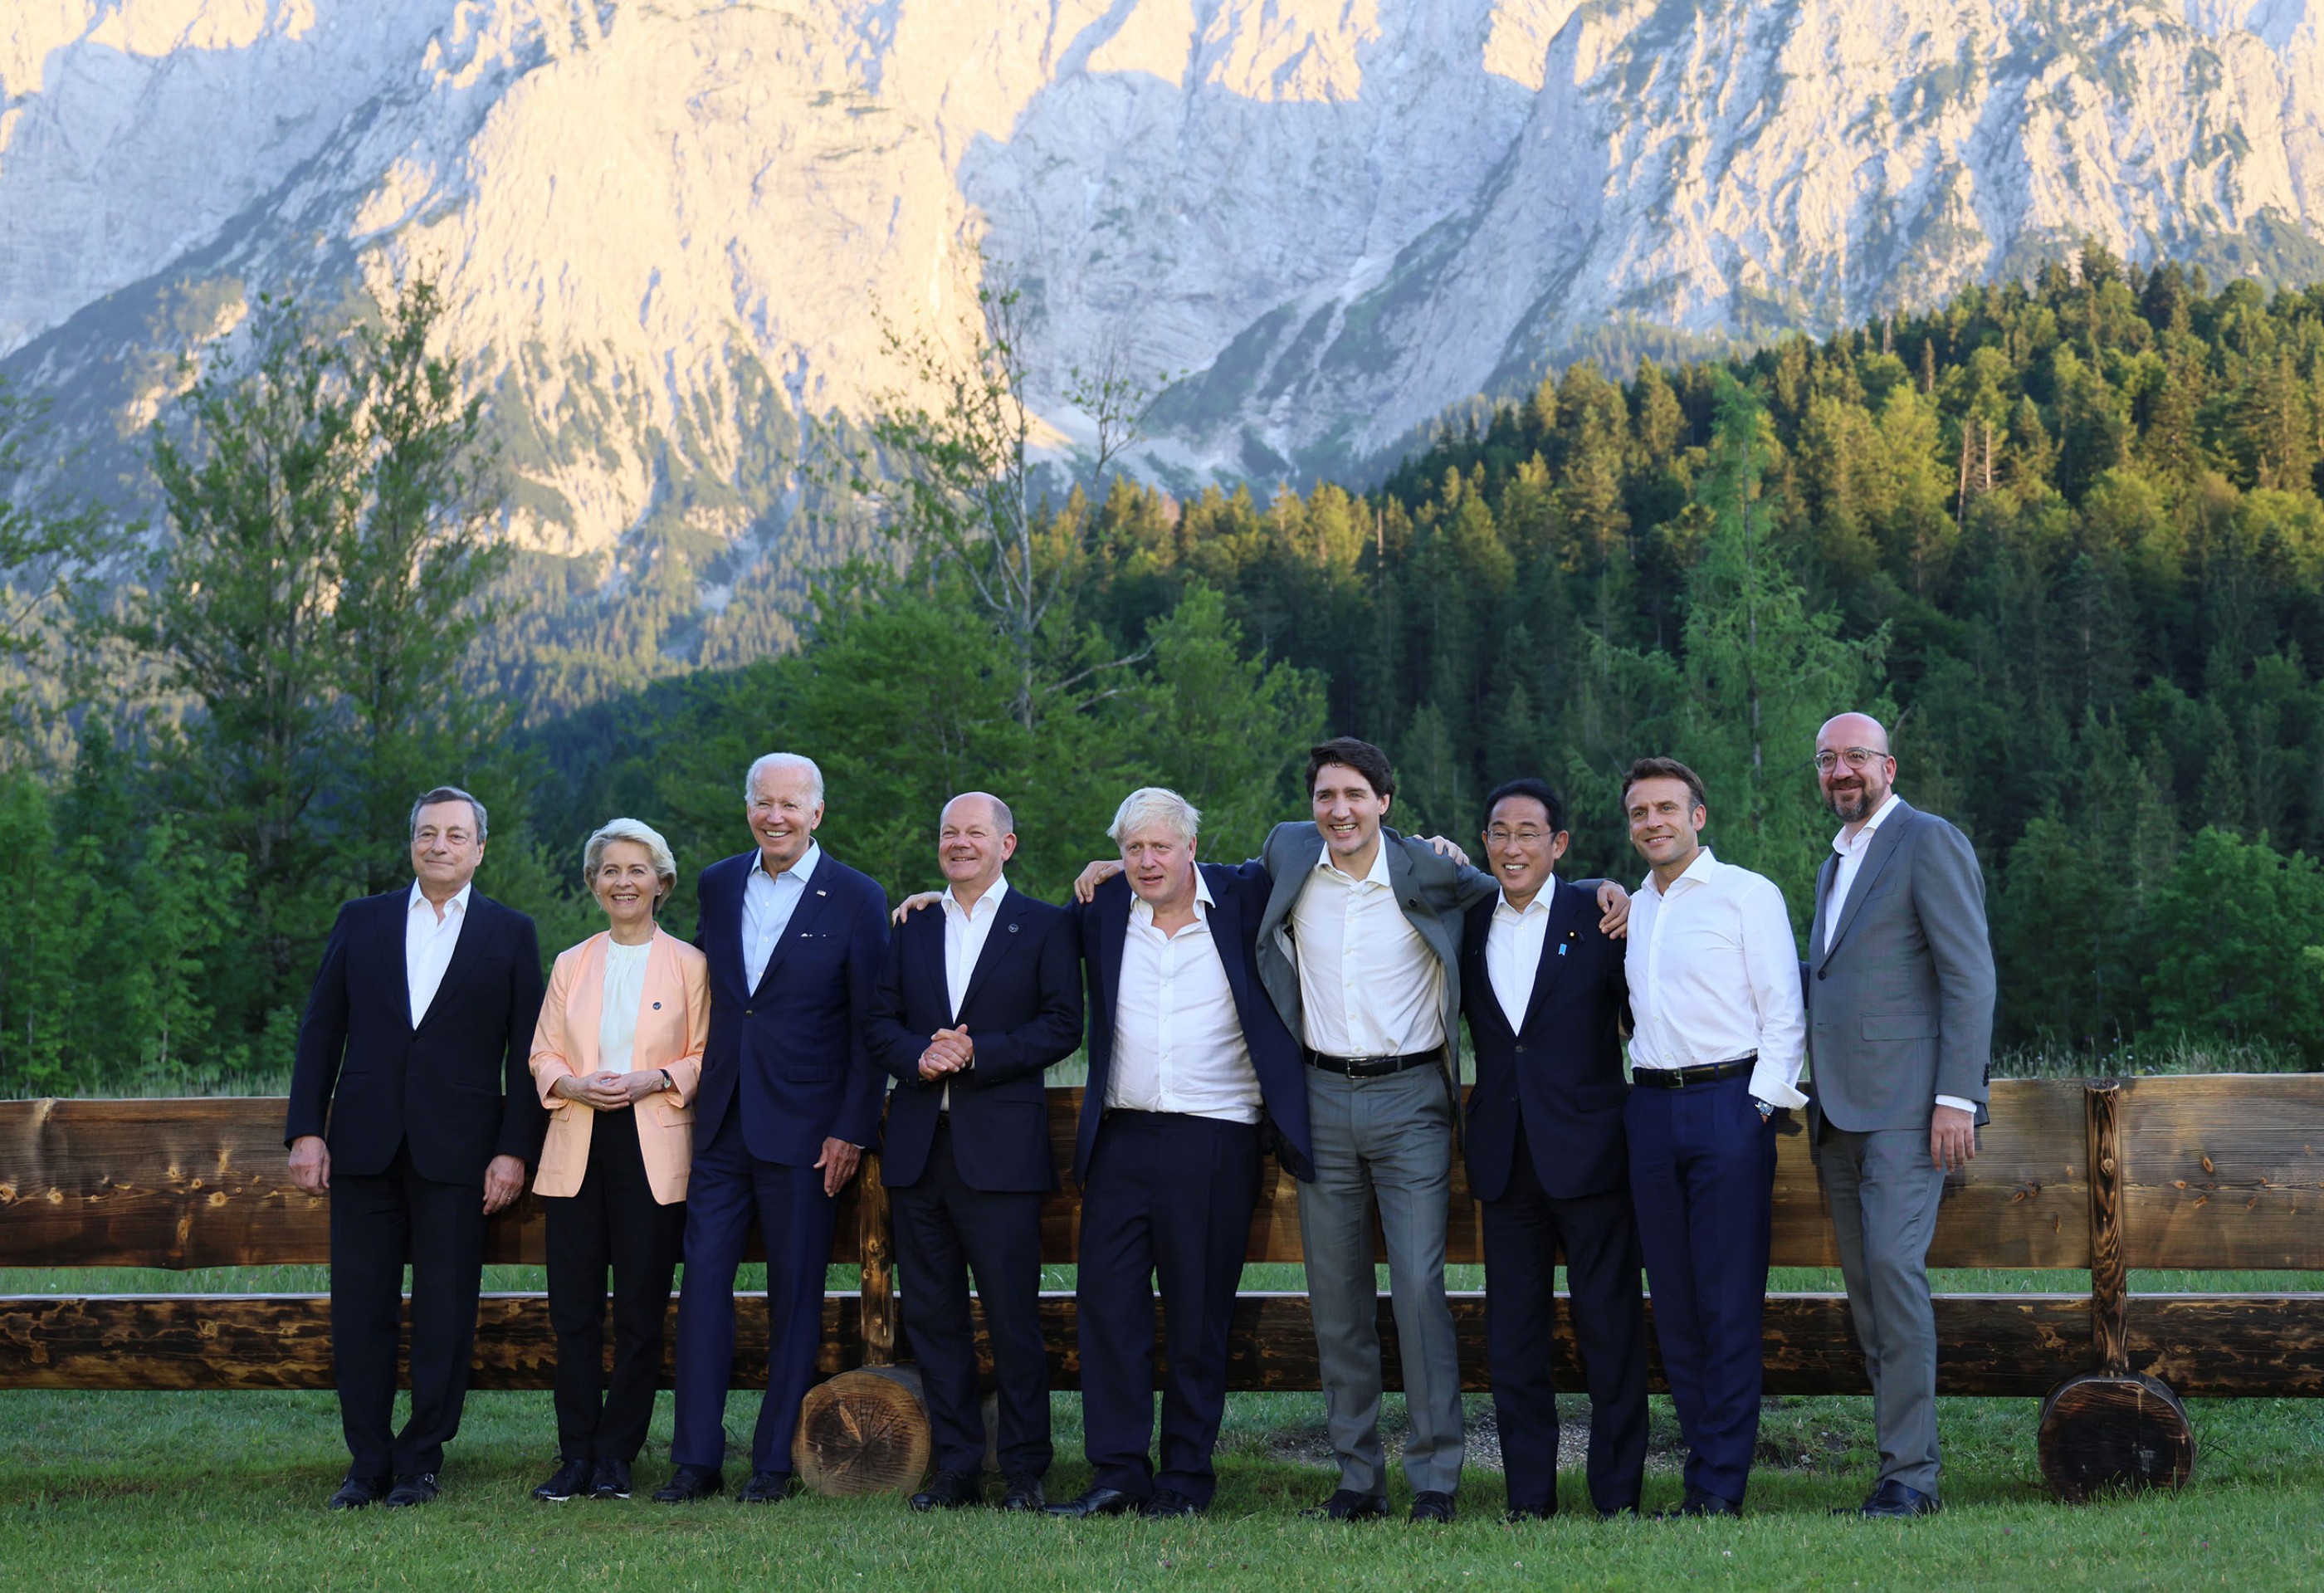 Fig. 6: Group photo of G7 members under the Alps at the Schloss Elmau Summit, 2022